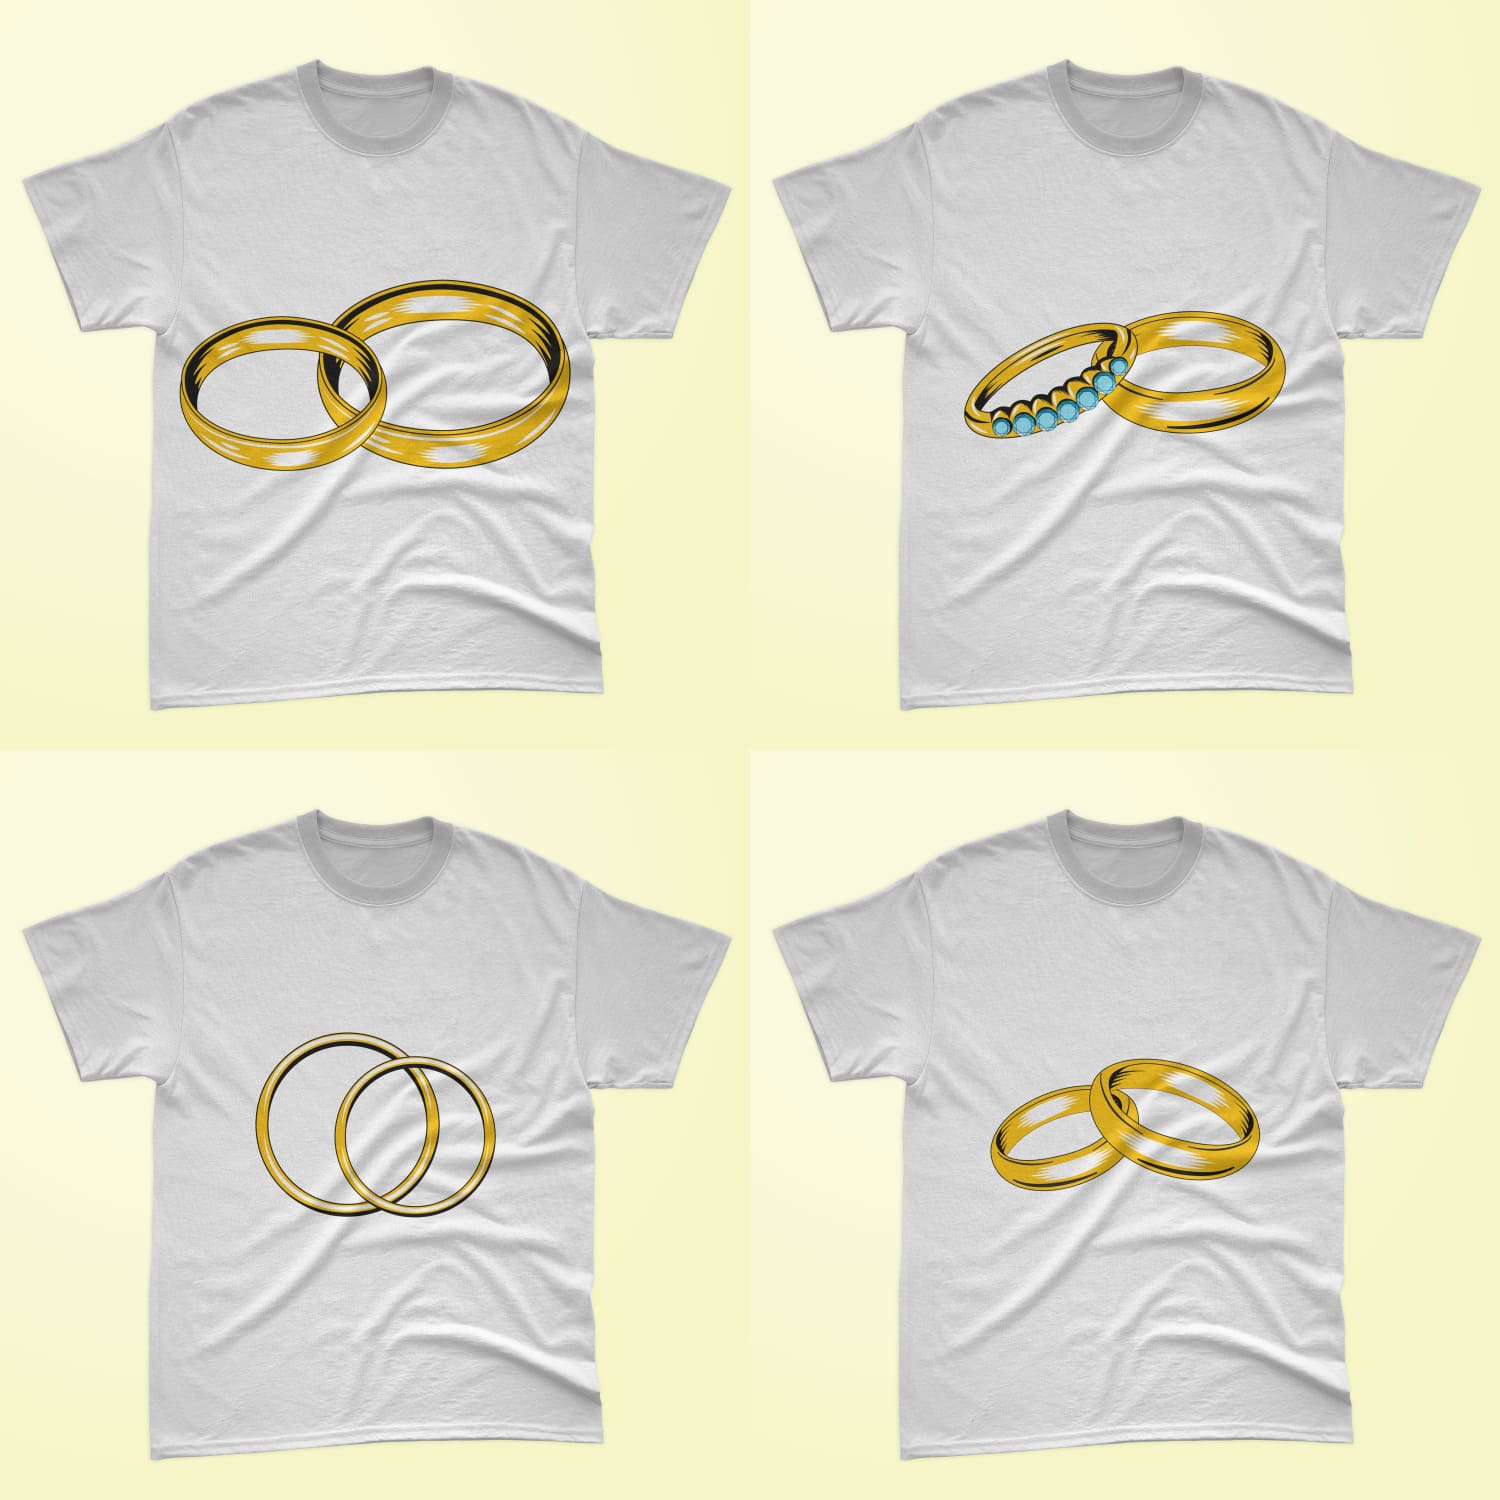 A selection of images of t-shirts with elegant prints of engagement rings.